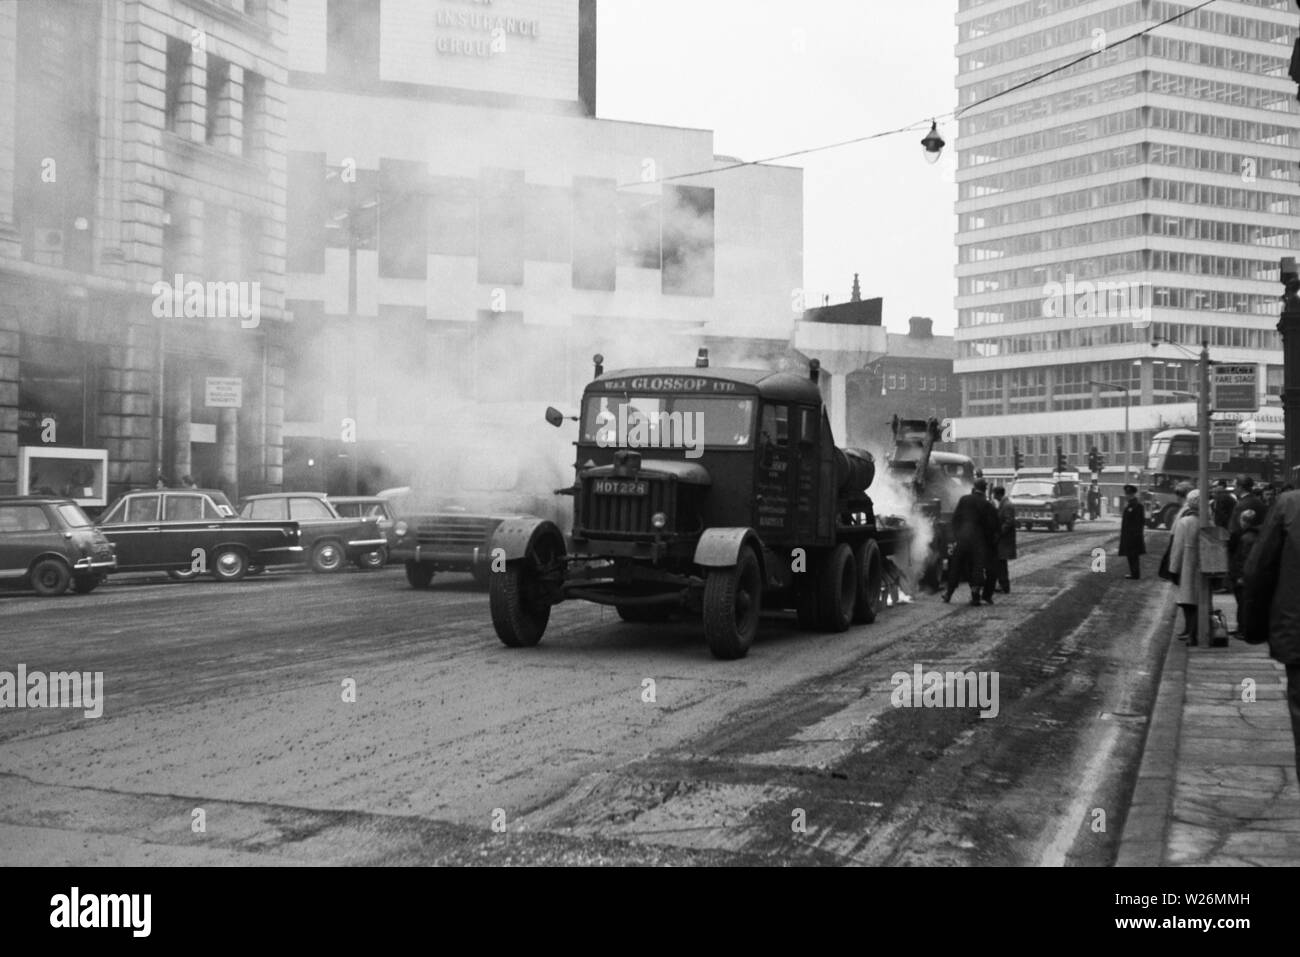 Known as the 'Kings of Tar spraying',W&J Glossop Ltd was a company based in West Yorkshire. The image was taken during the early 1960s The road working vehicle is a Scammell reg no HDT 228 Stock Photo